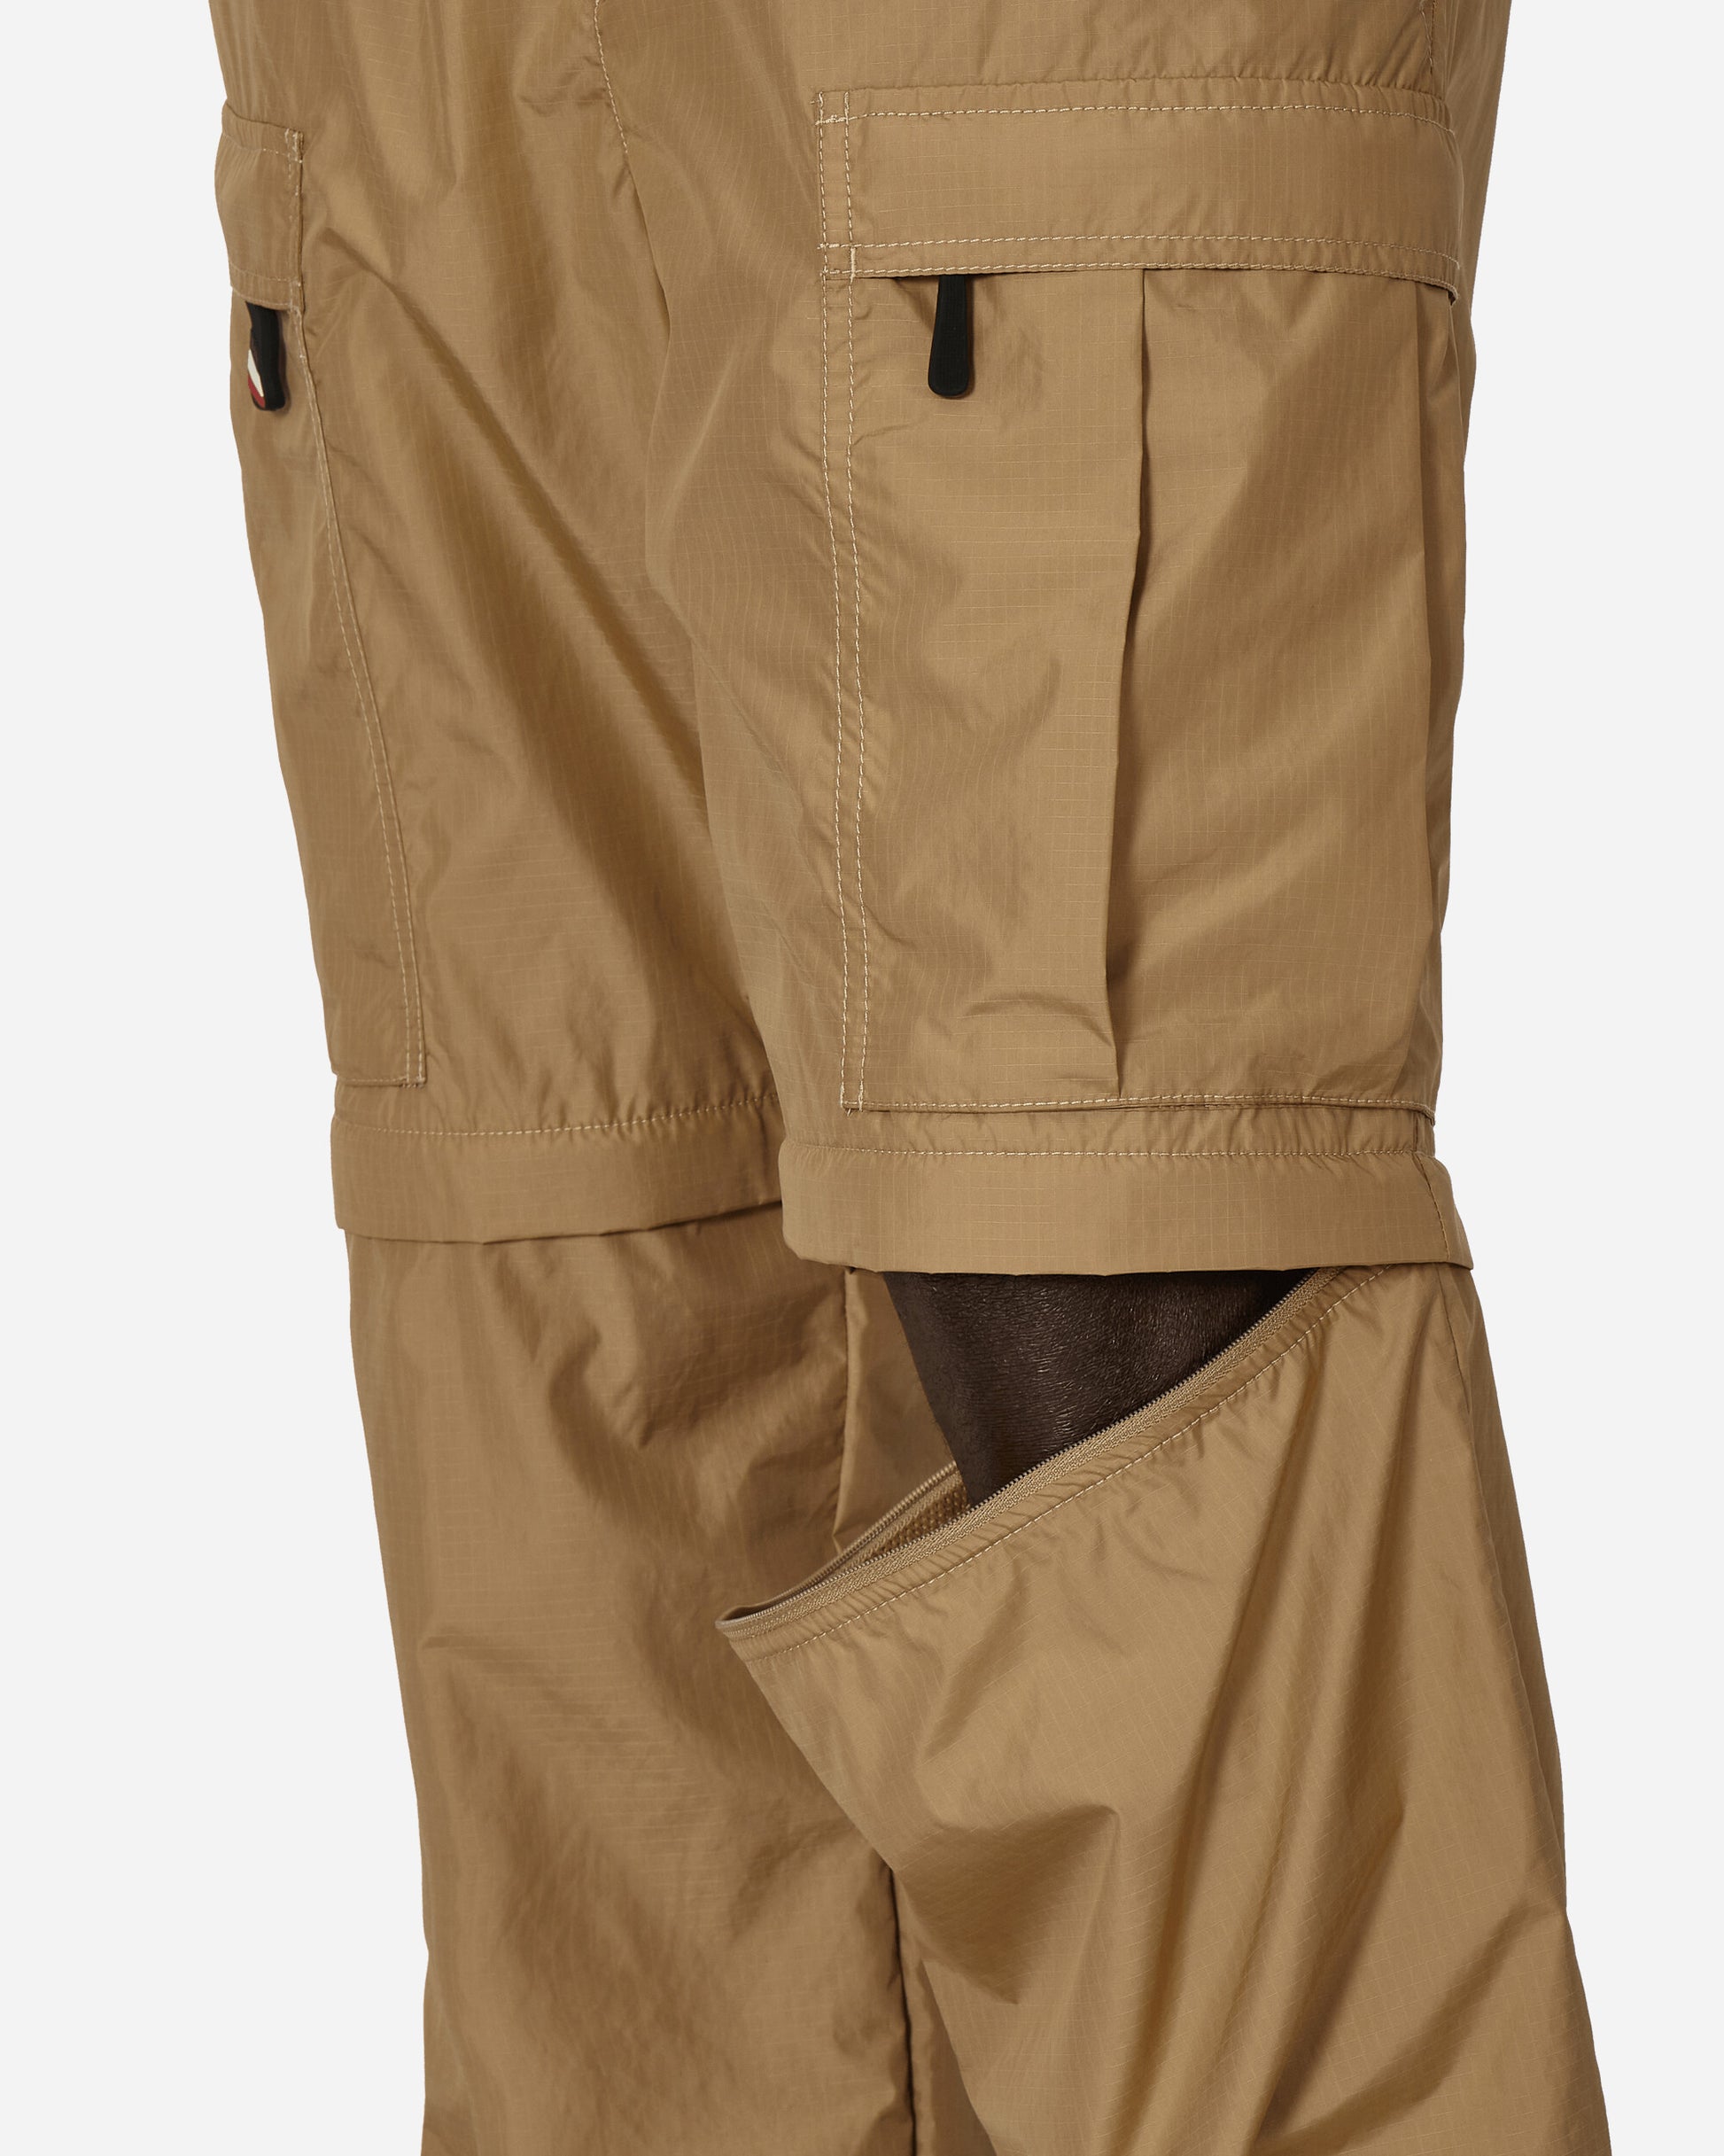 Moncler Grenoble Trousers Day-Namic Beige Pants Cargo 2A0000454A3E 226